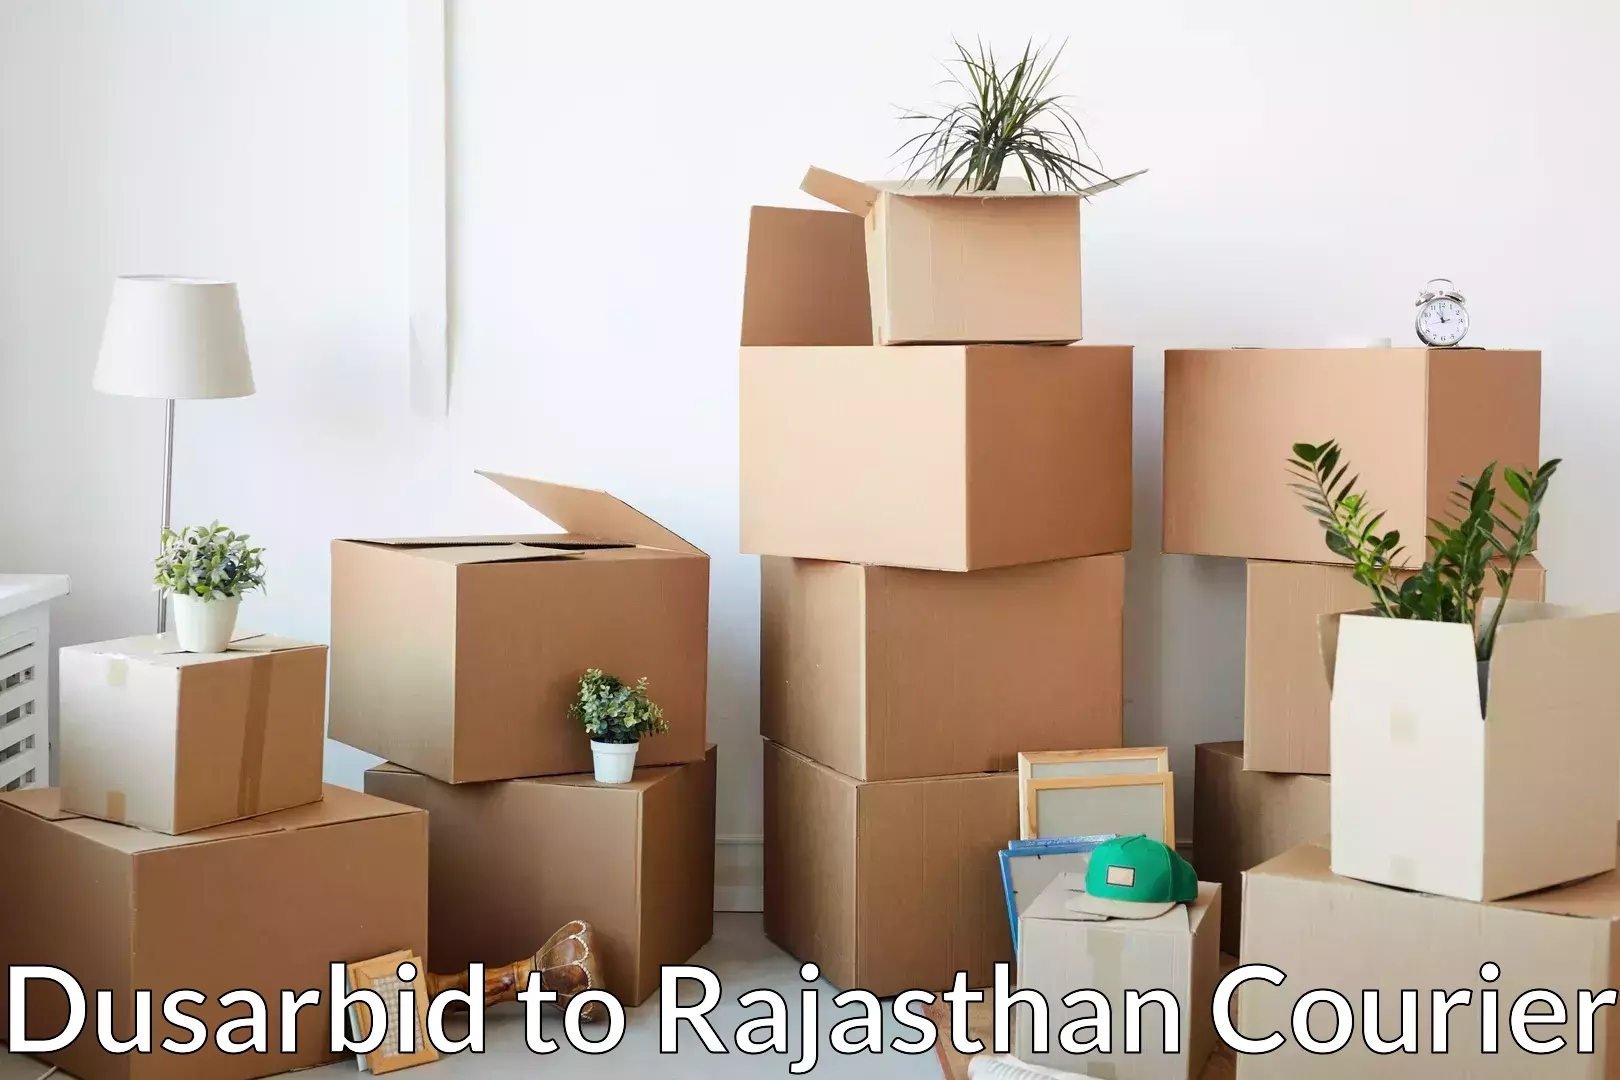 Hassle-free relocation Dusarbid to Piparcity